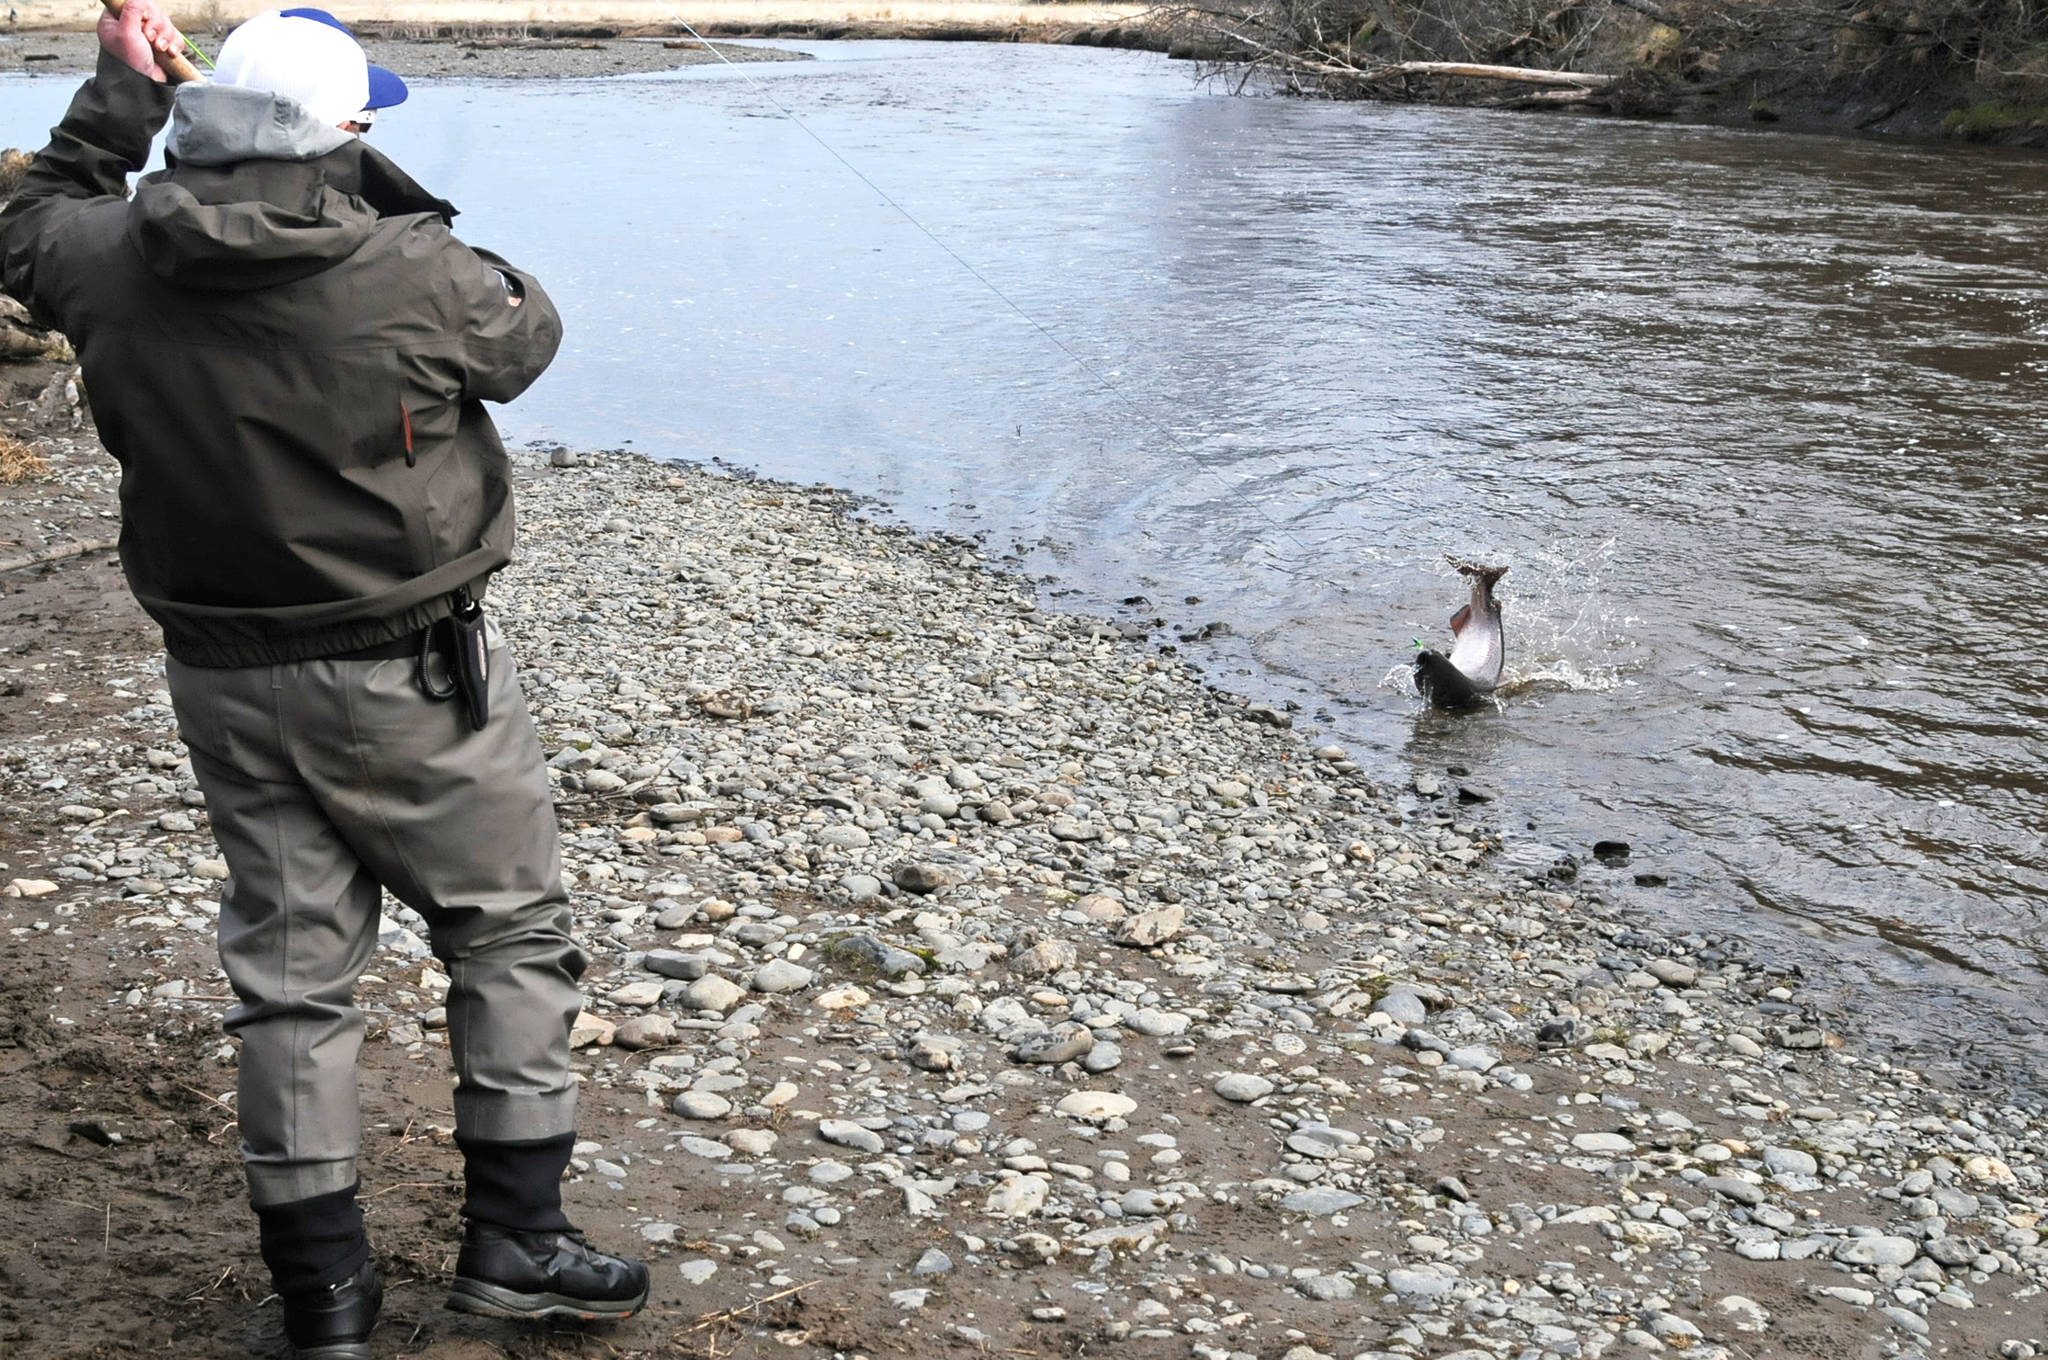 Terry Umatum of Anchorage banks his Anchor River king salmon on Saturday, May 19, 2018 in Anchor Point, Alaska. The Anchor River opening May 19 was the first chance for freshwater anglers on the Kenai Peninsula to catch king salmon. Saturday proved a slow morning for fishing — Umatum said he waited about 5 hours to catch his king — though it’s still early in the season. The Alaska Department of Fish and Game’s weir on the Anchor River has counted precisely zero kings so far this year, as of May 17, though the weir is positioned several miles upriver from the mouth. (Photo by Elizabeth Earl/Peninsula Clarion)